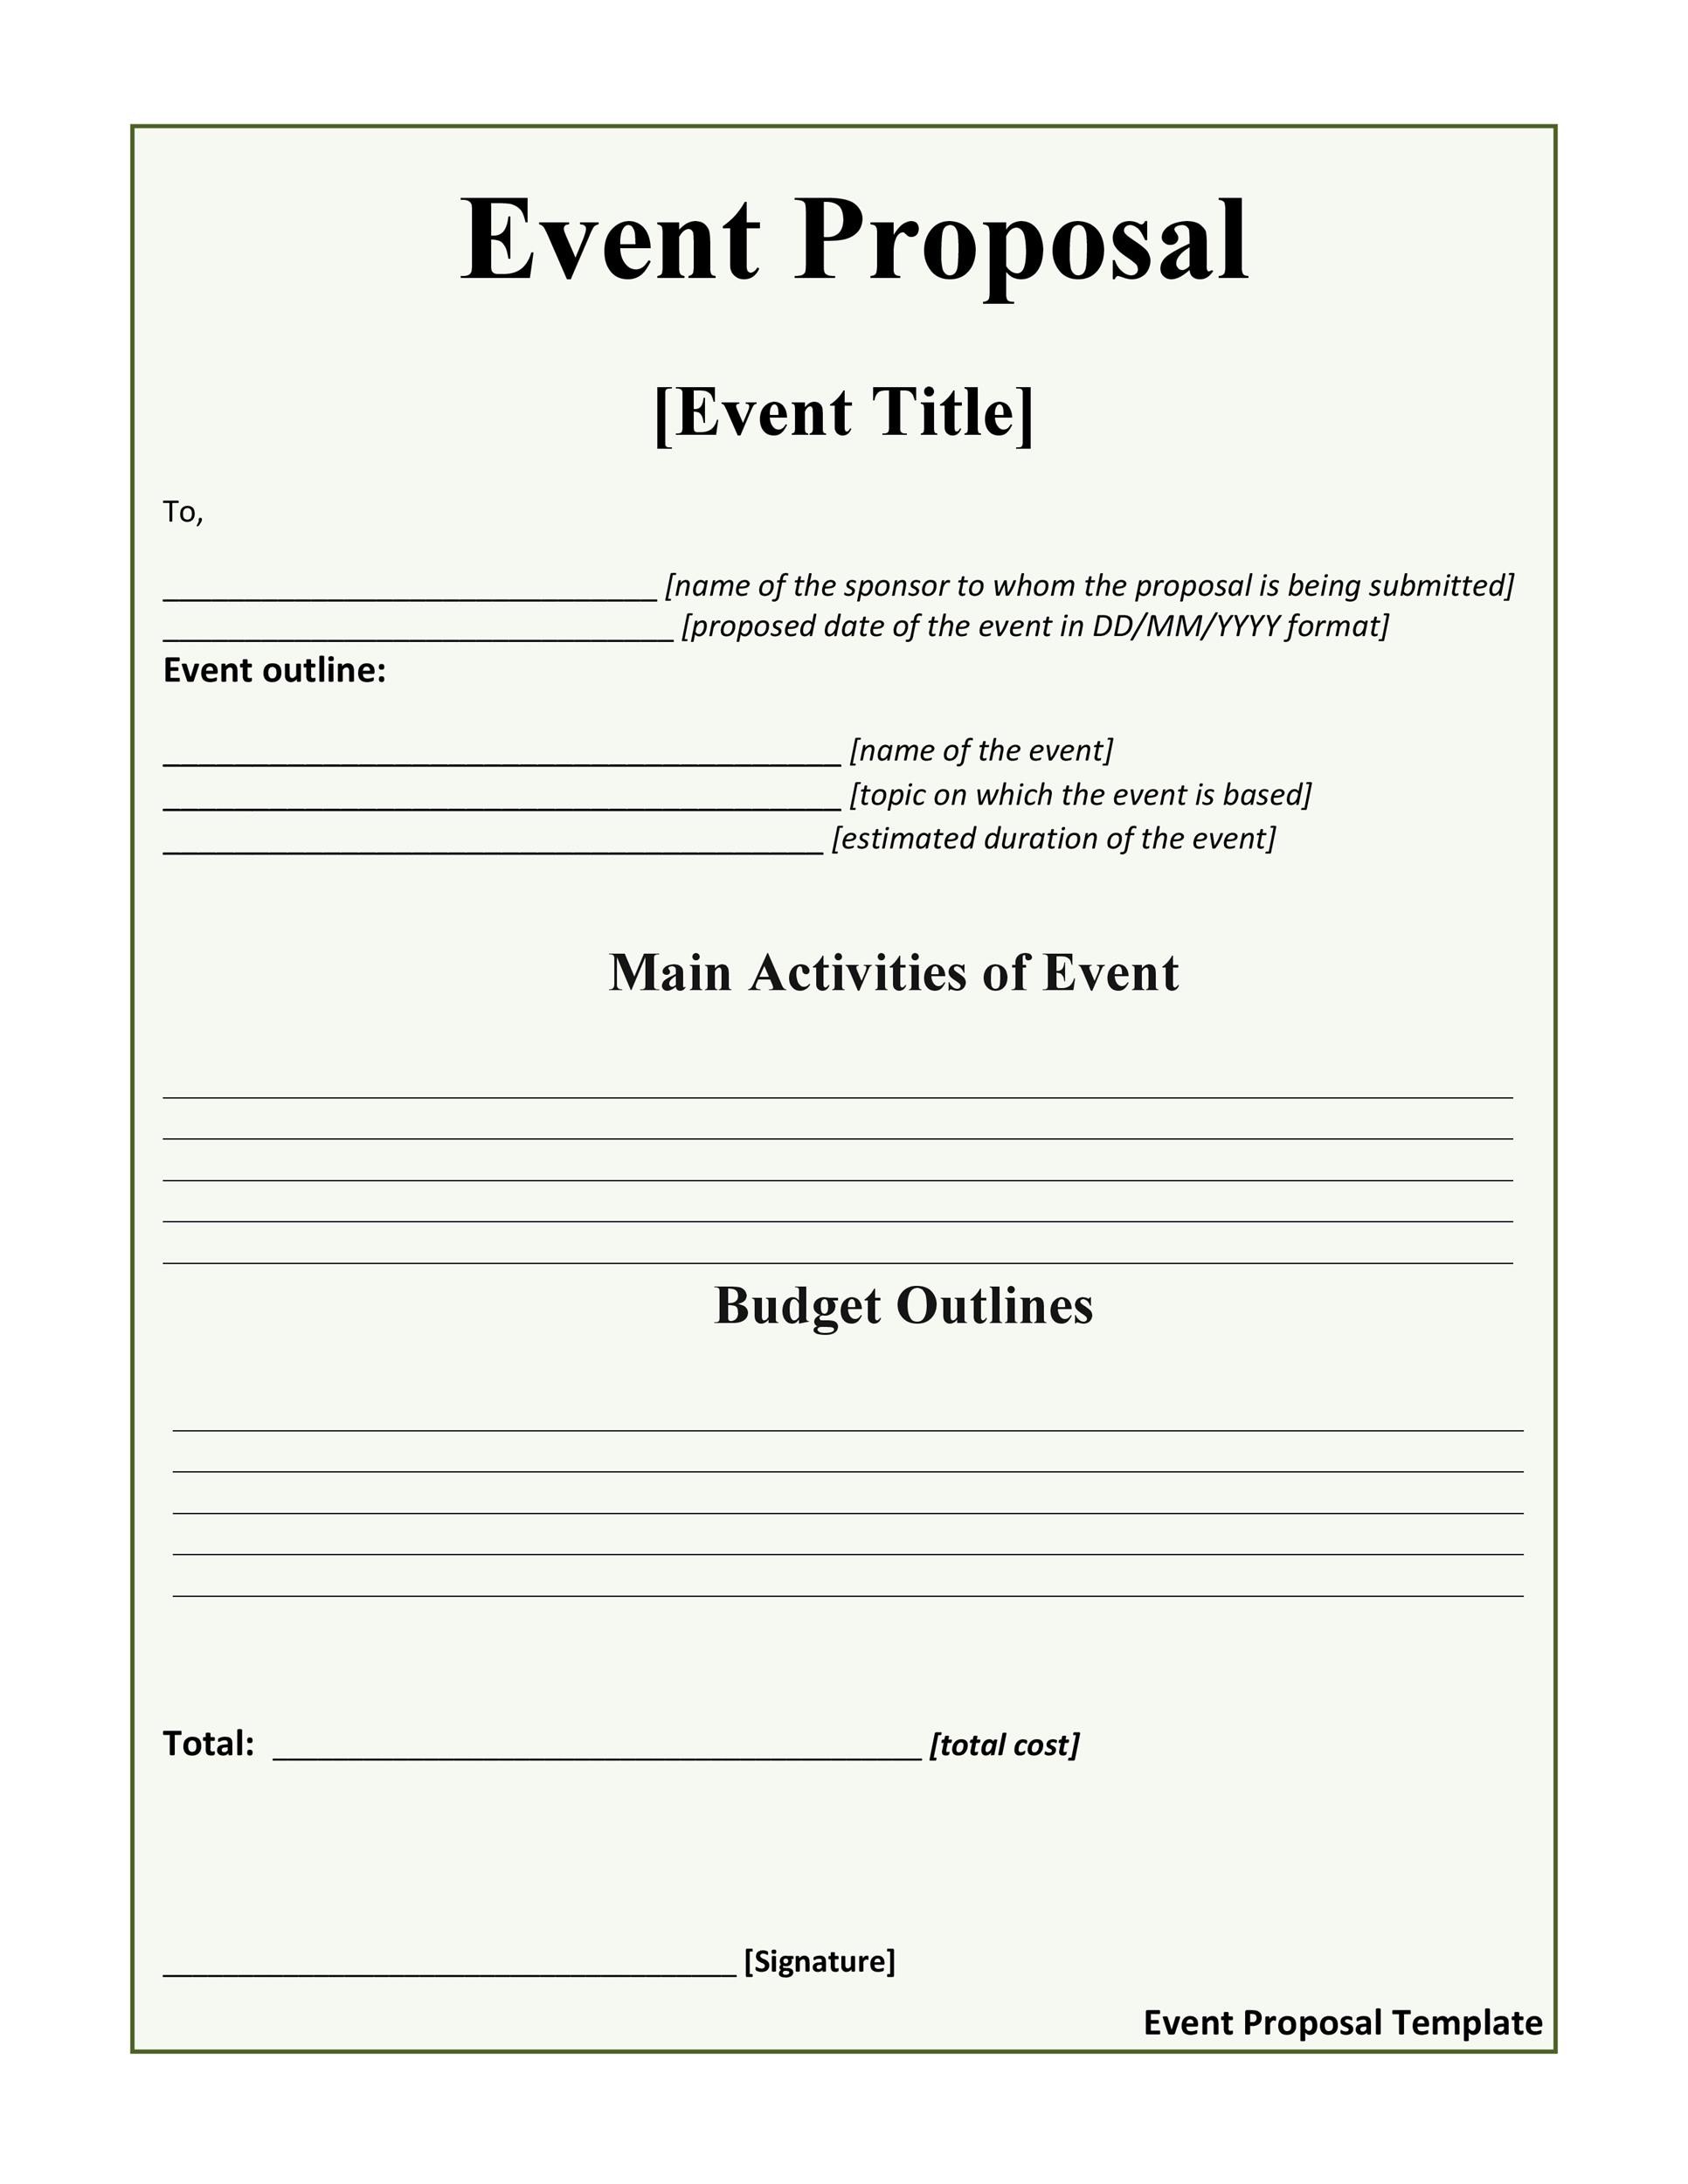 Event proposal template free download www.google.com search video download free